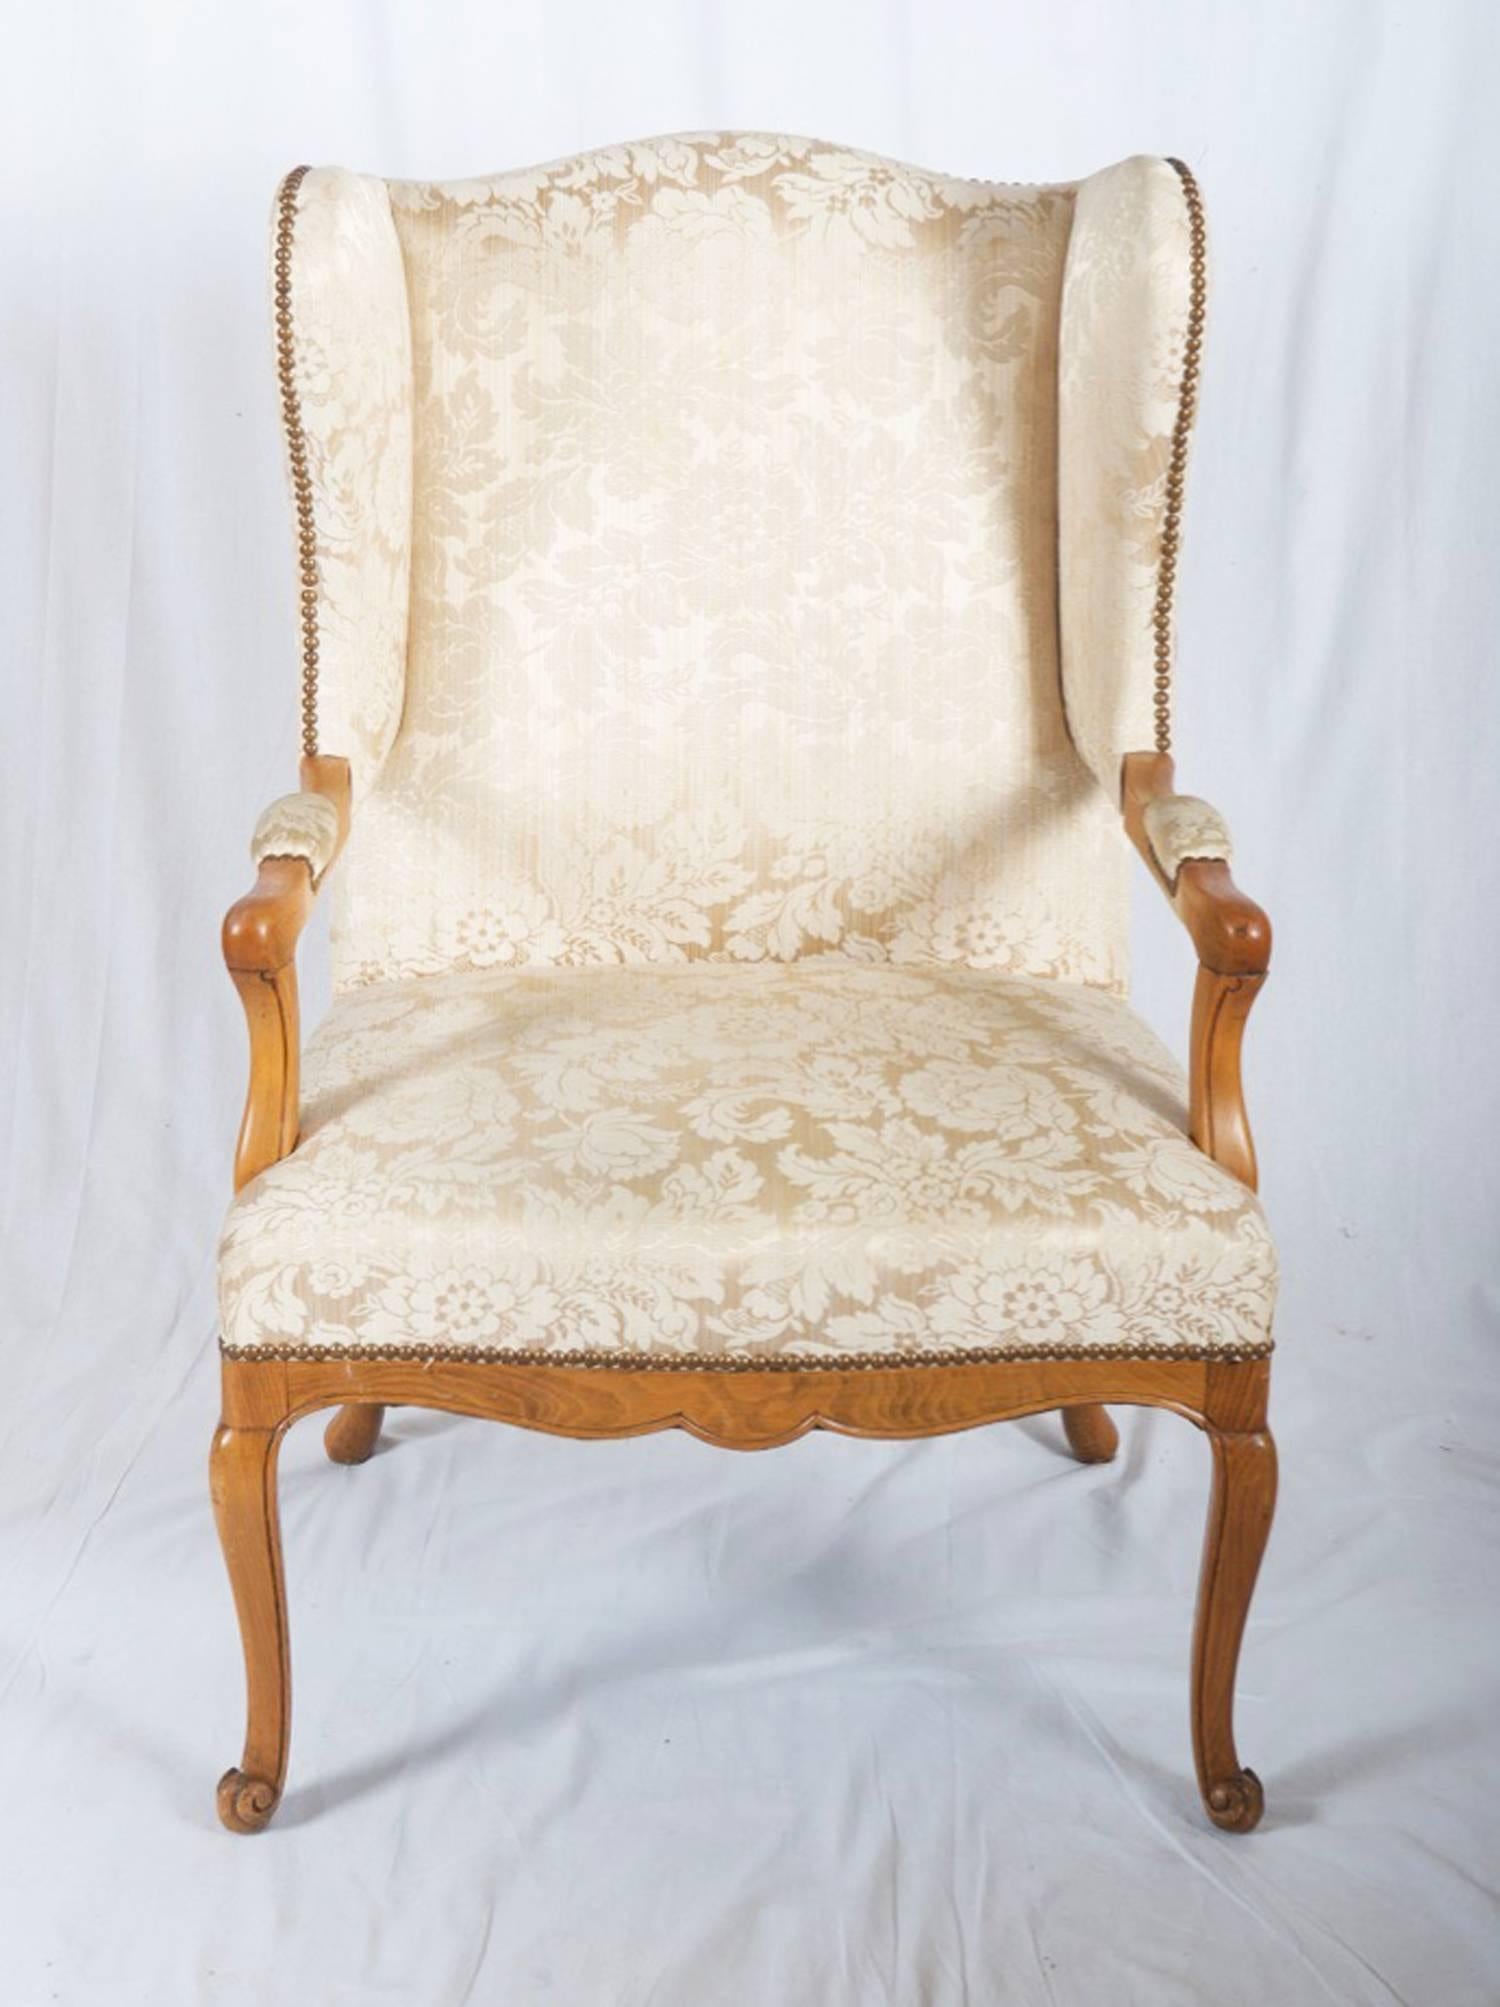 Carved walnut frame cushioned seat and upholstered in gold or beige damask.